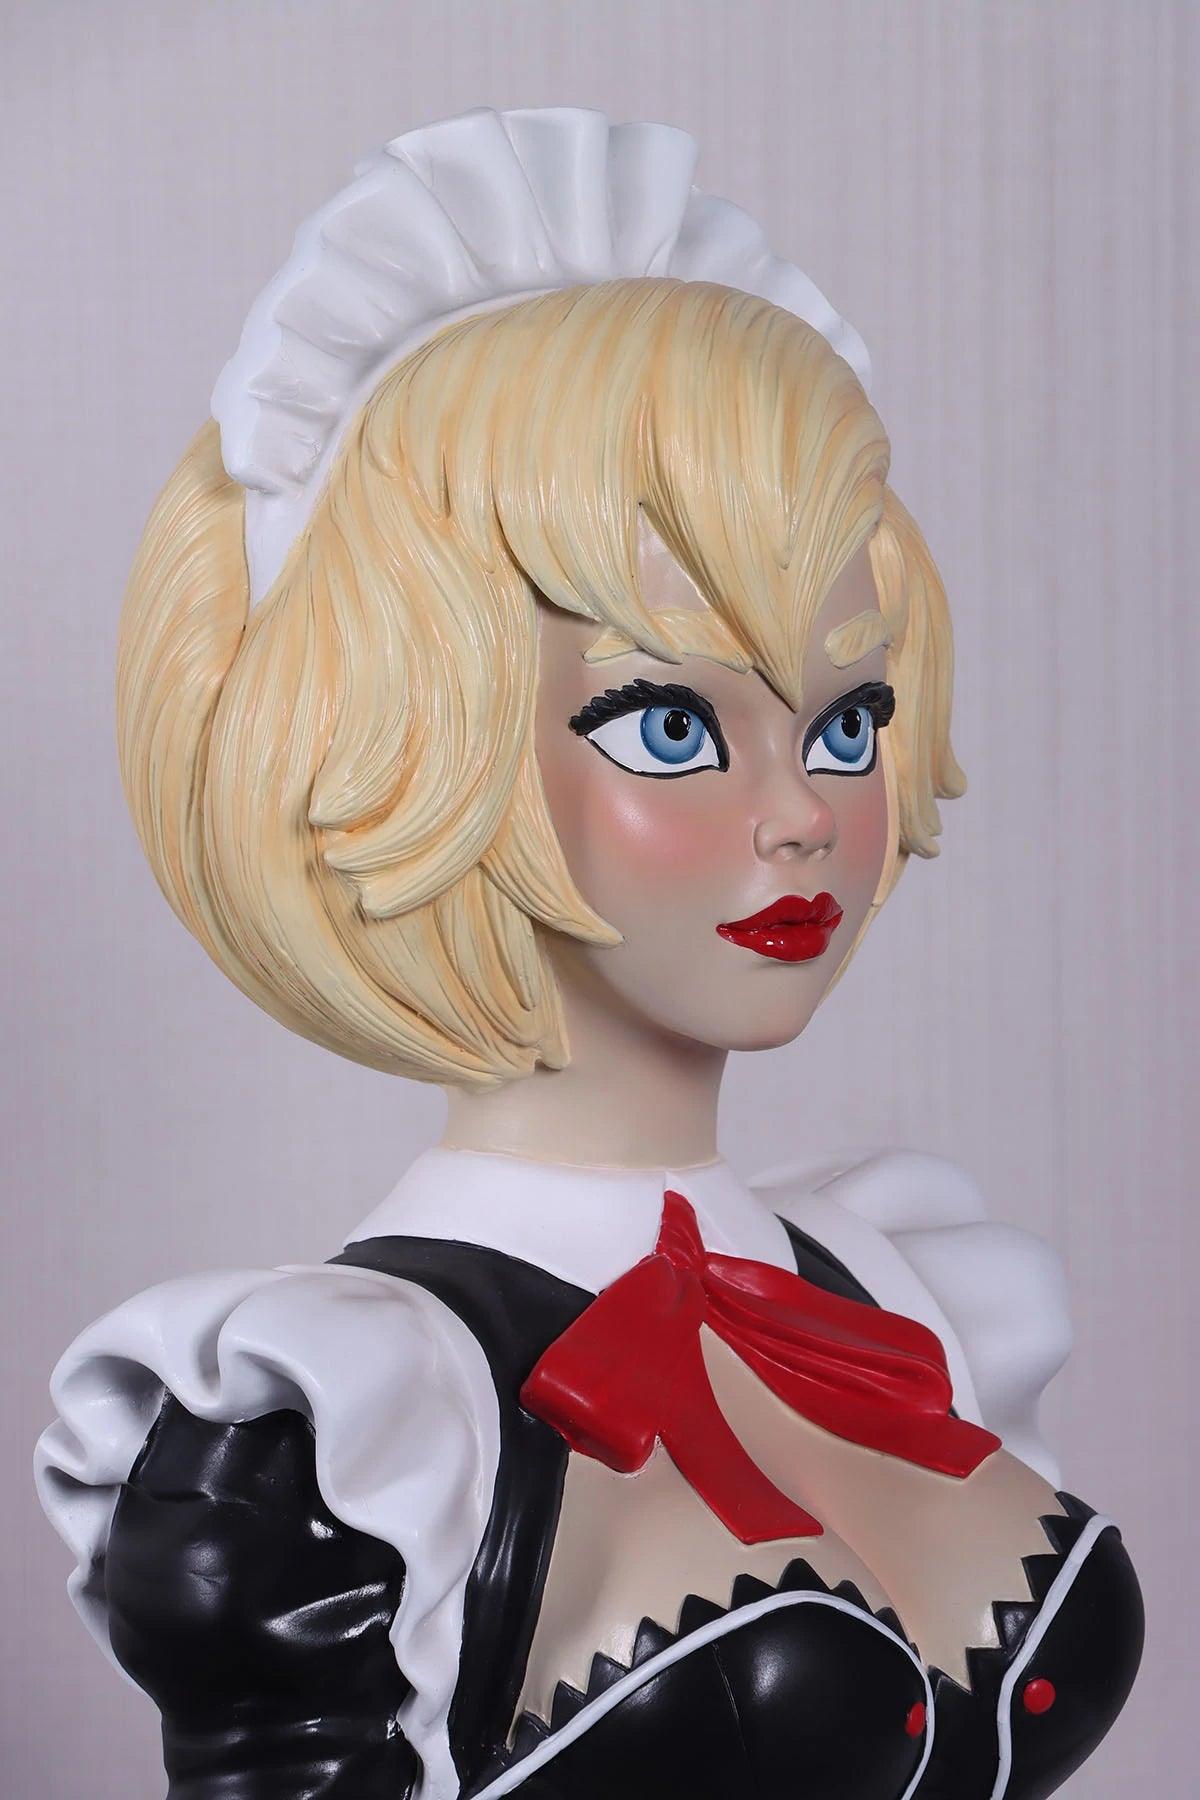 French Maid Anime Life Size Statue - LM Treasures Prop Rentals 